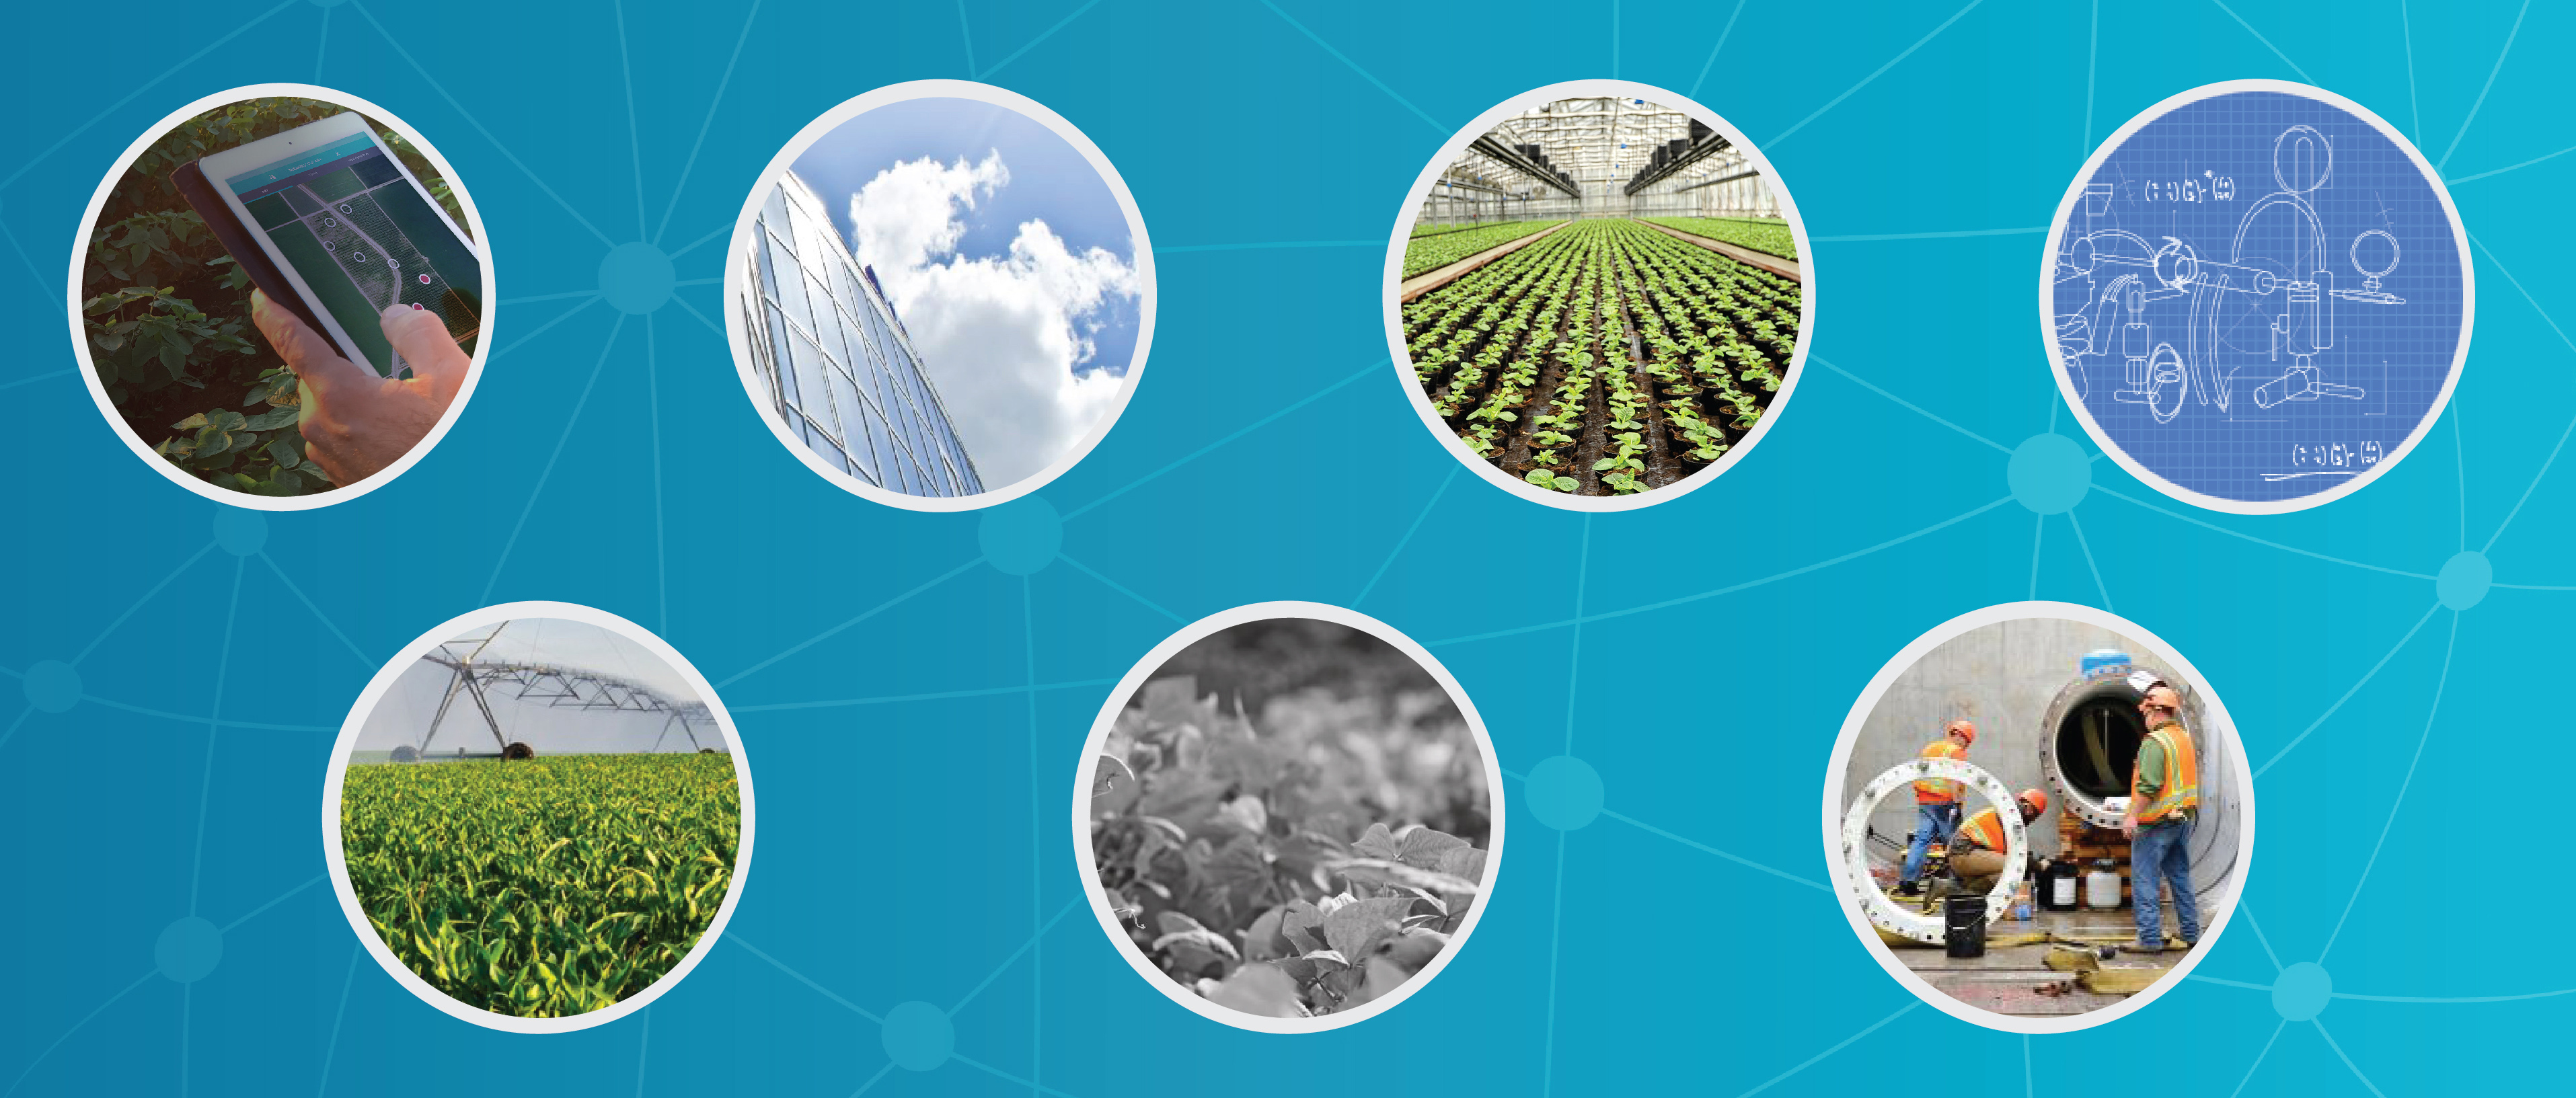 Growing Innovation with OurCrowd’s GreenTech Portfolio [Infographic]